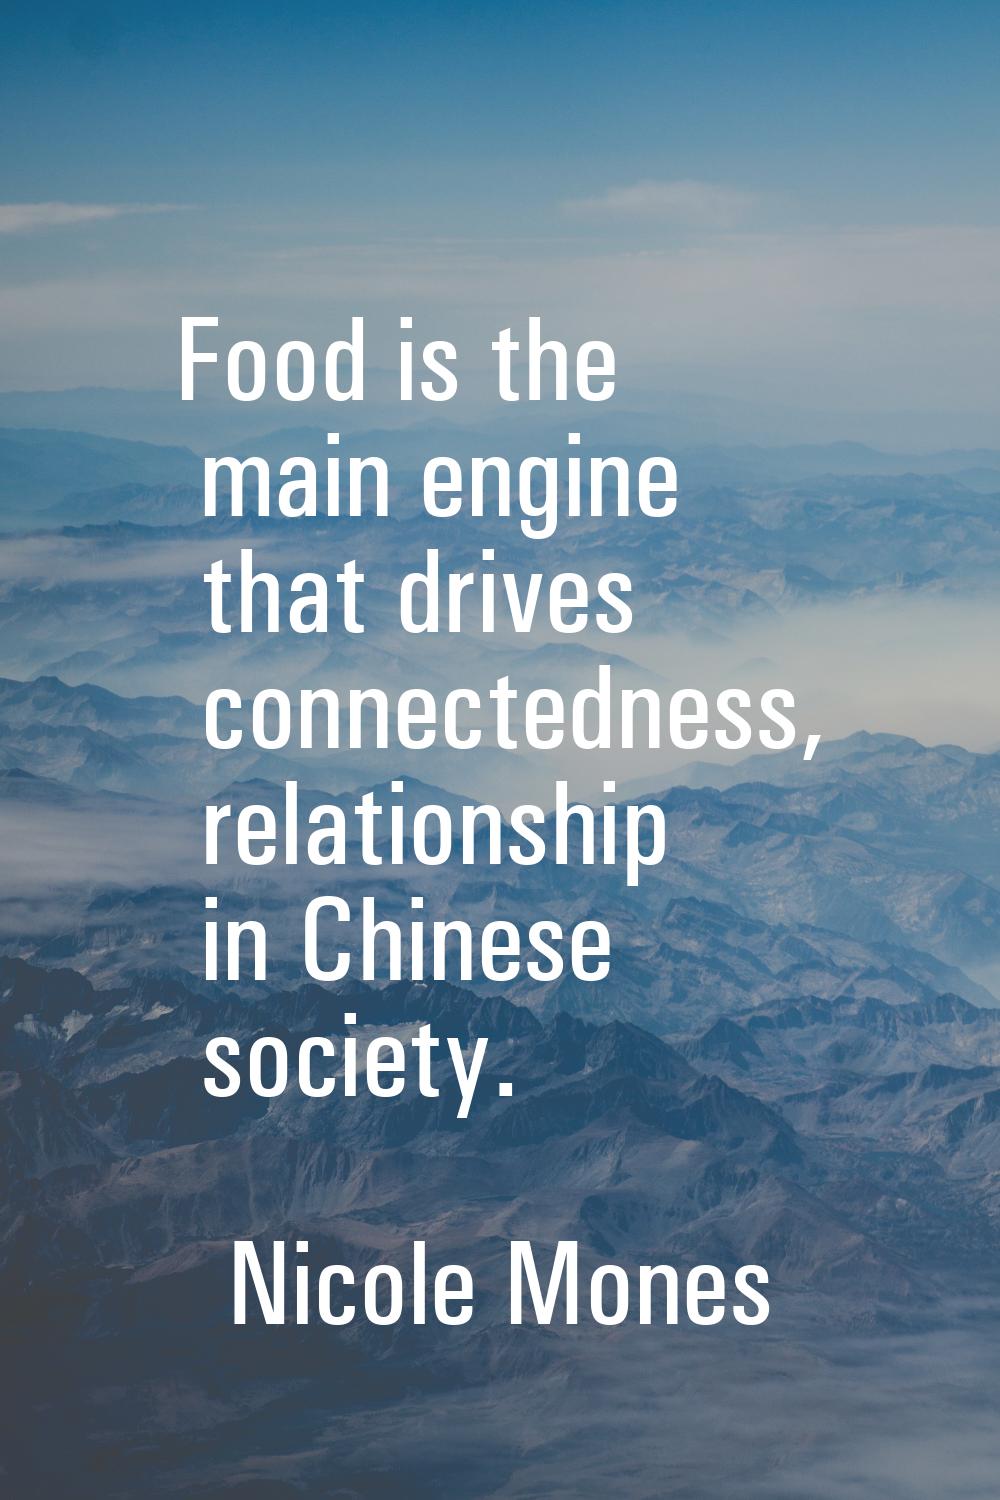 Food is the main engine that drives connectedness, relationship in Chinese society.